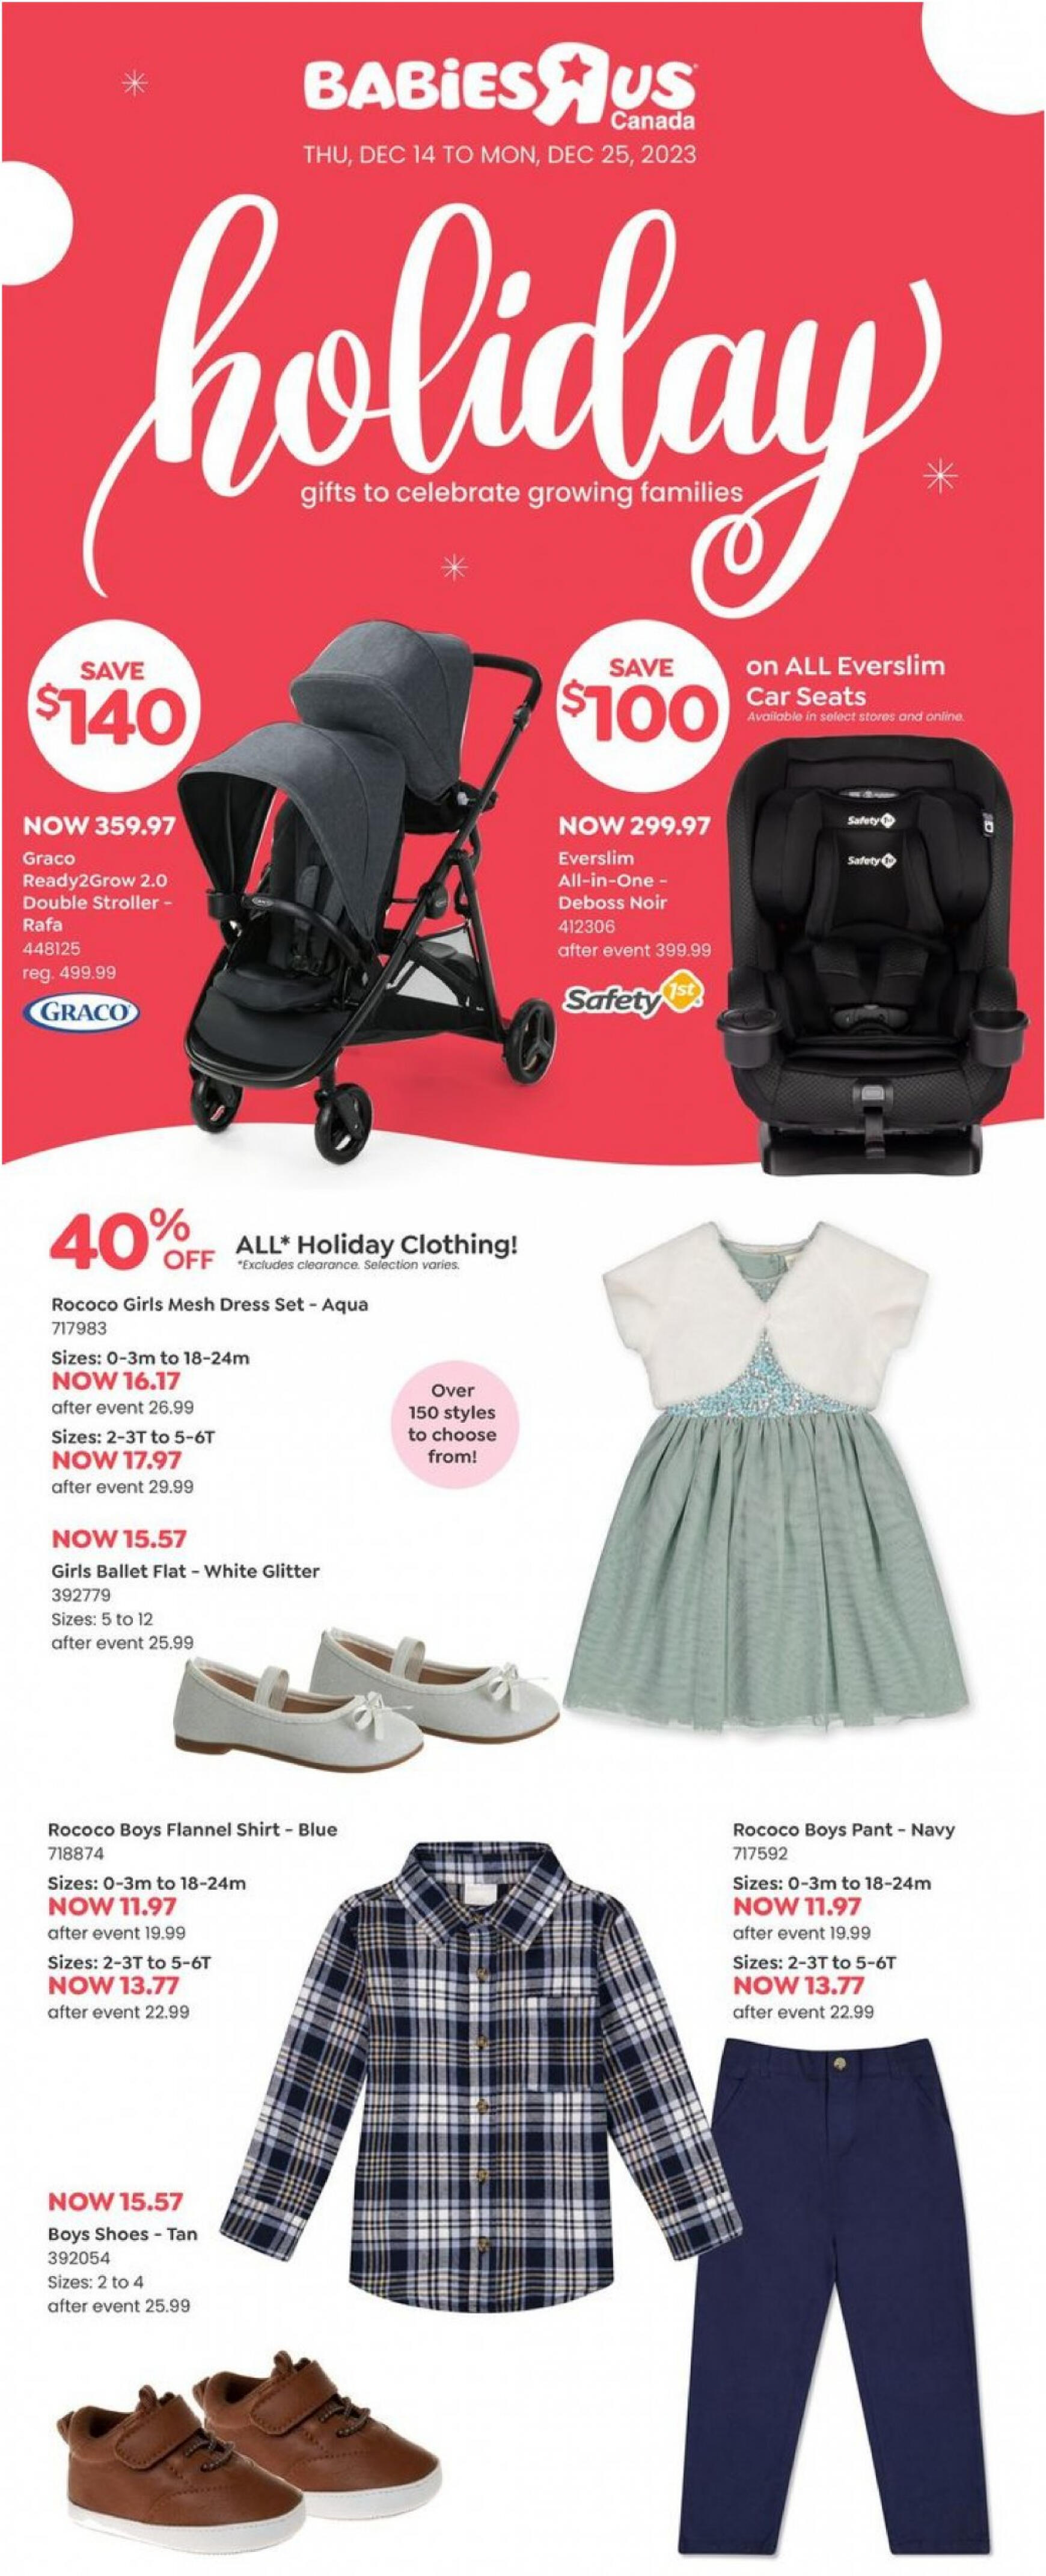 toys-r-us - Toysrus - Babies"R"Us Flyer valid from 14.12.2023